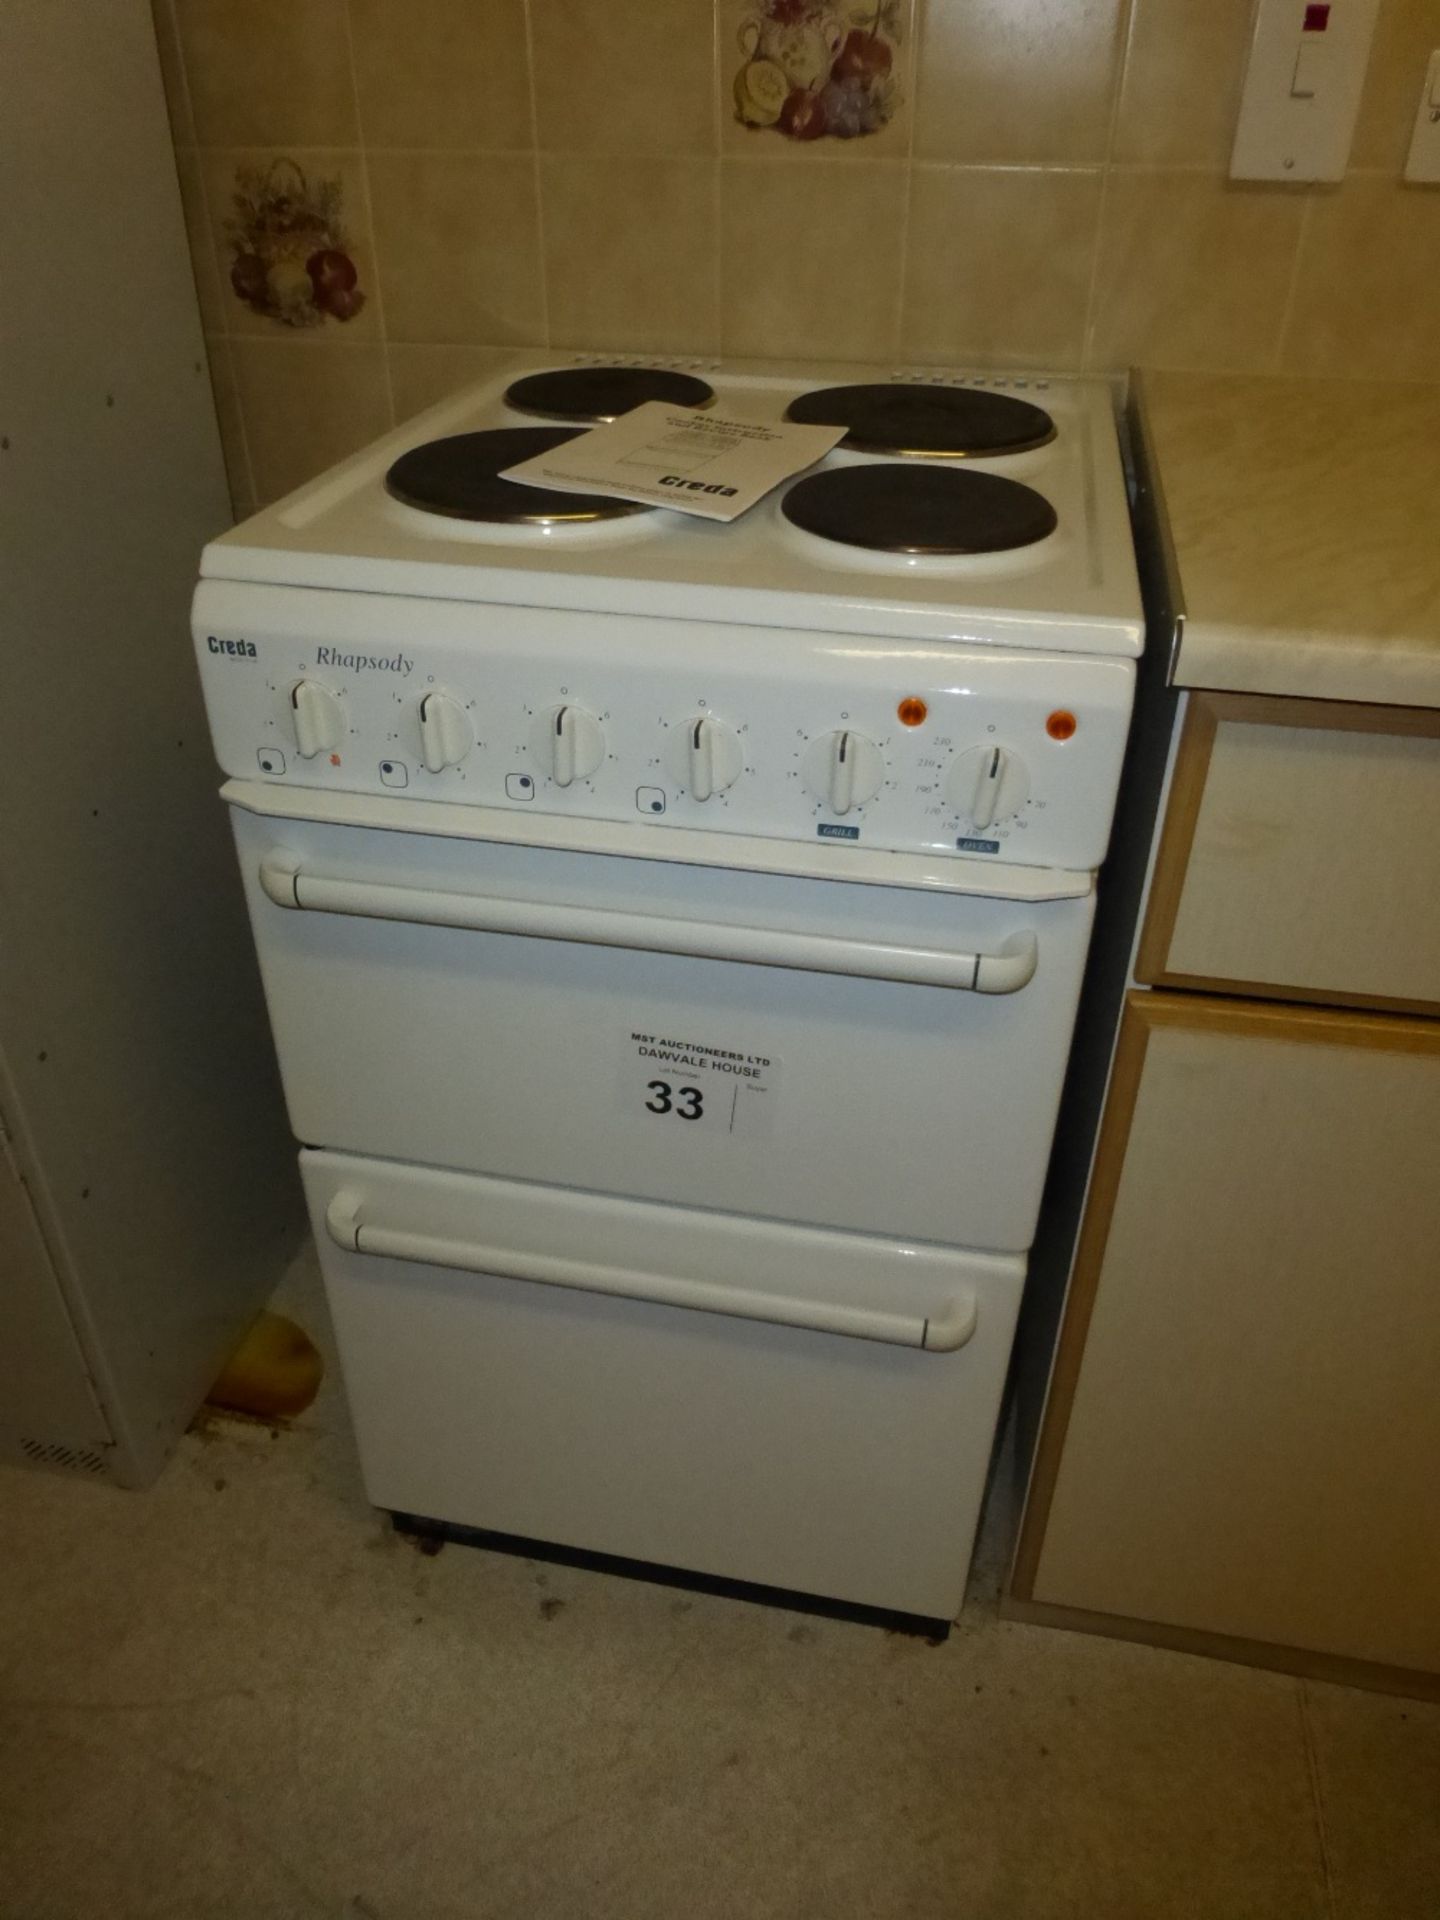 1 Creda Rhapsody white enamelled domestic cooker with oven and 4 top rings (located in room 11)